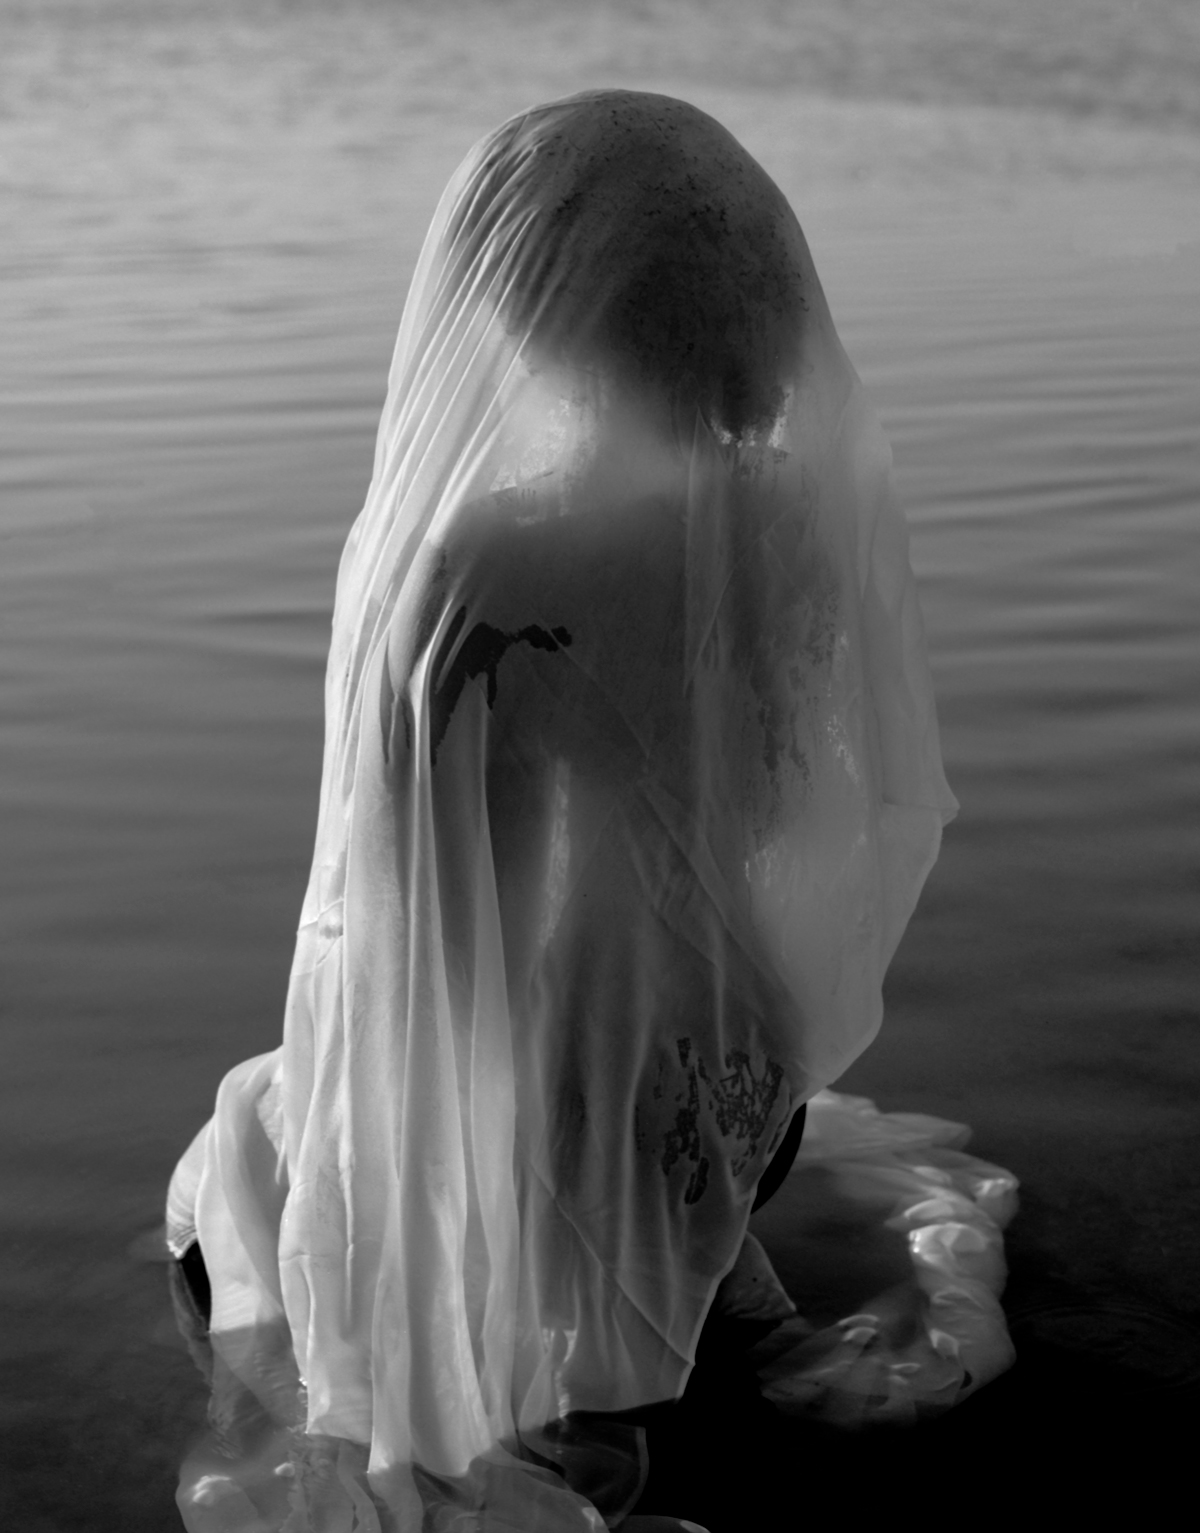 Black-and-white image of a woman's figure draped in transparent fabric, standing in water